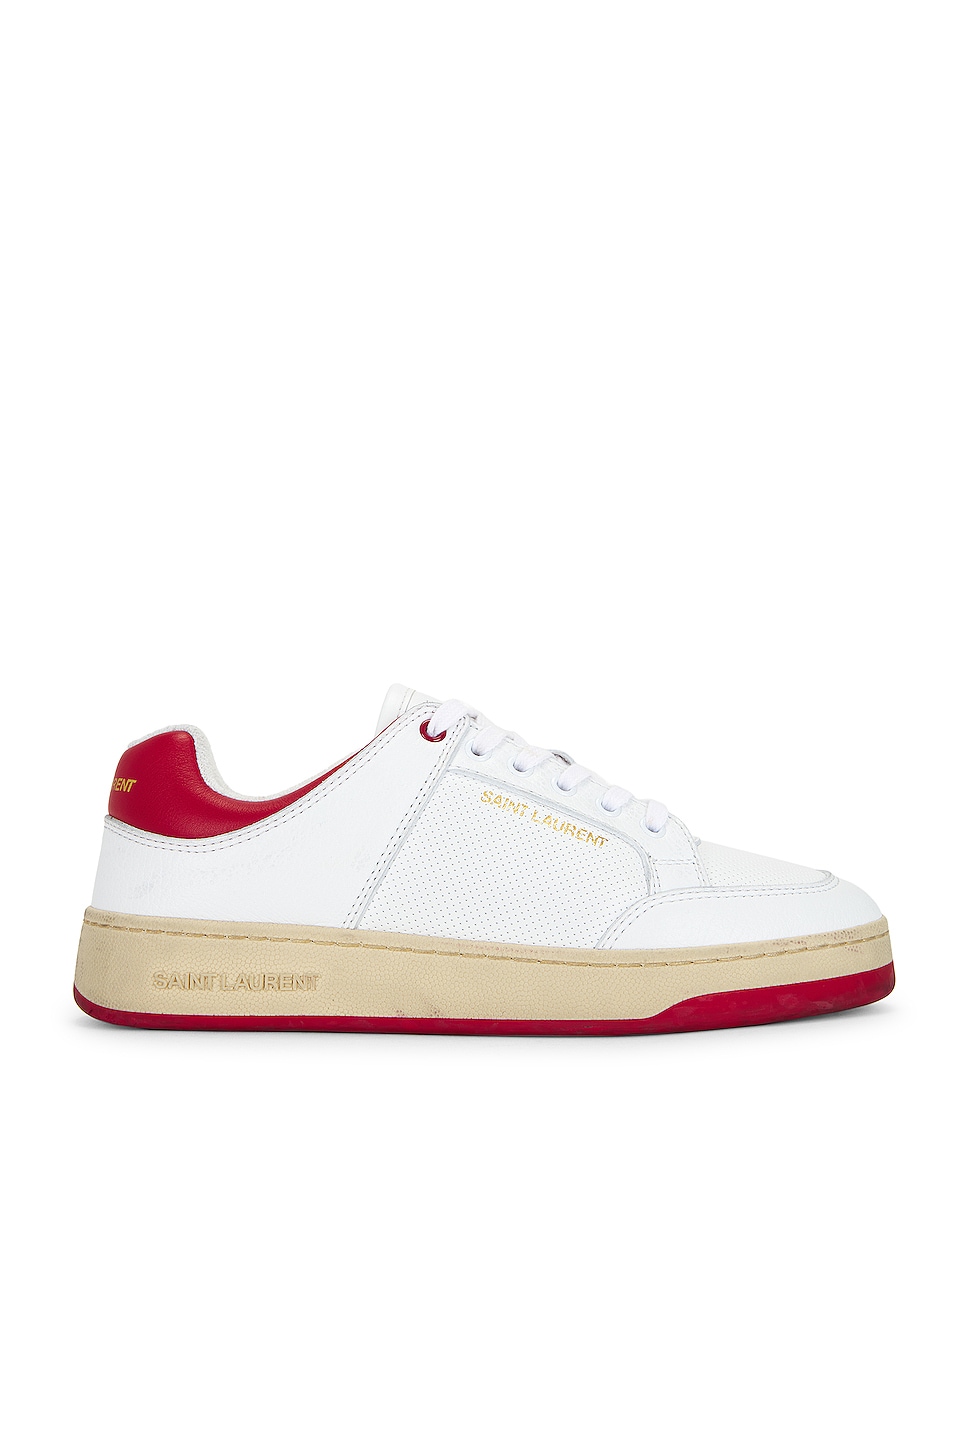 Image 1 of Saint Laurent 61 Sneaker in White & Red